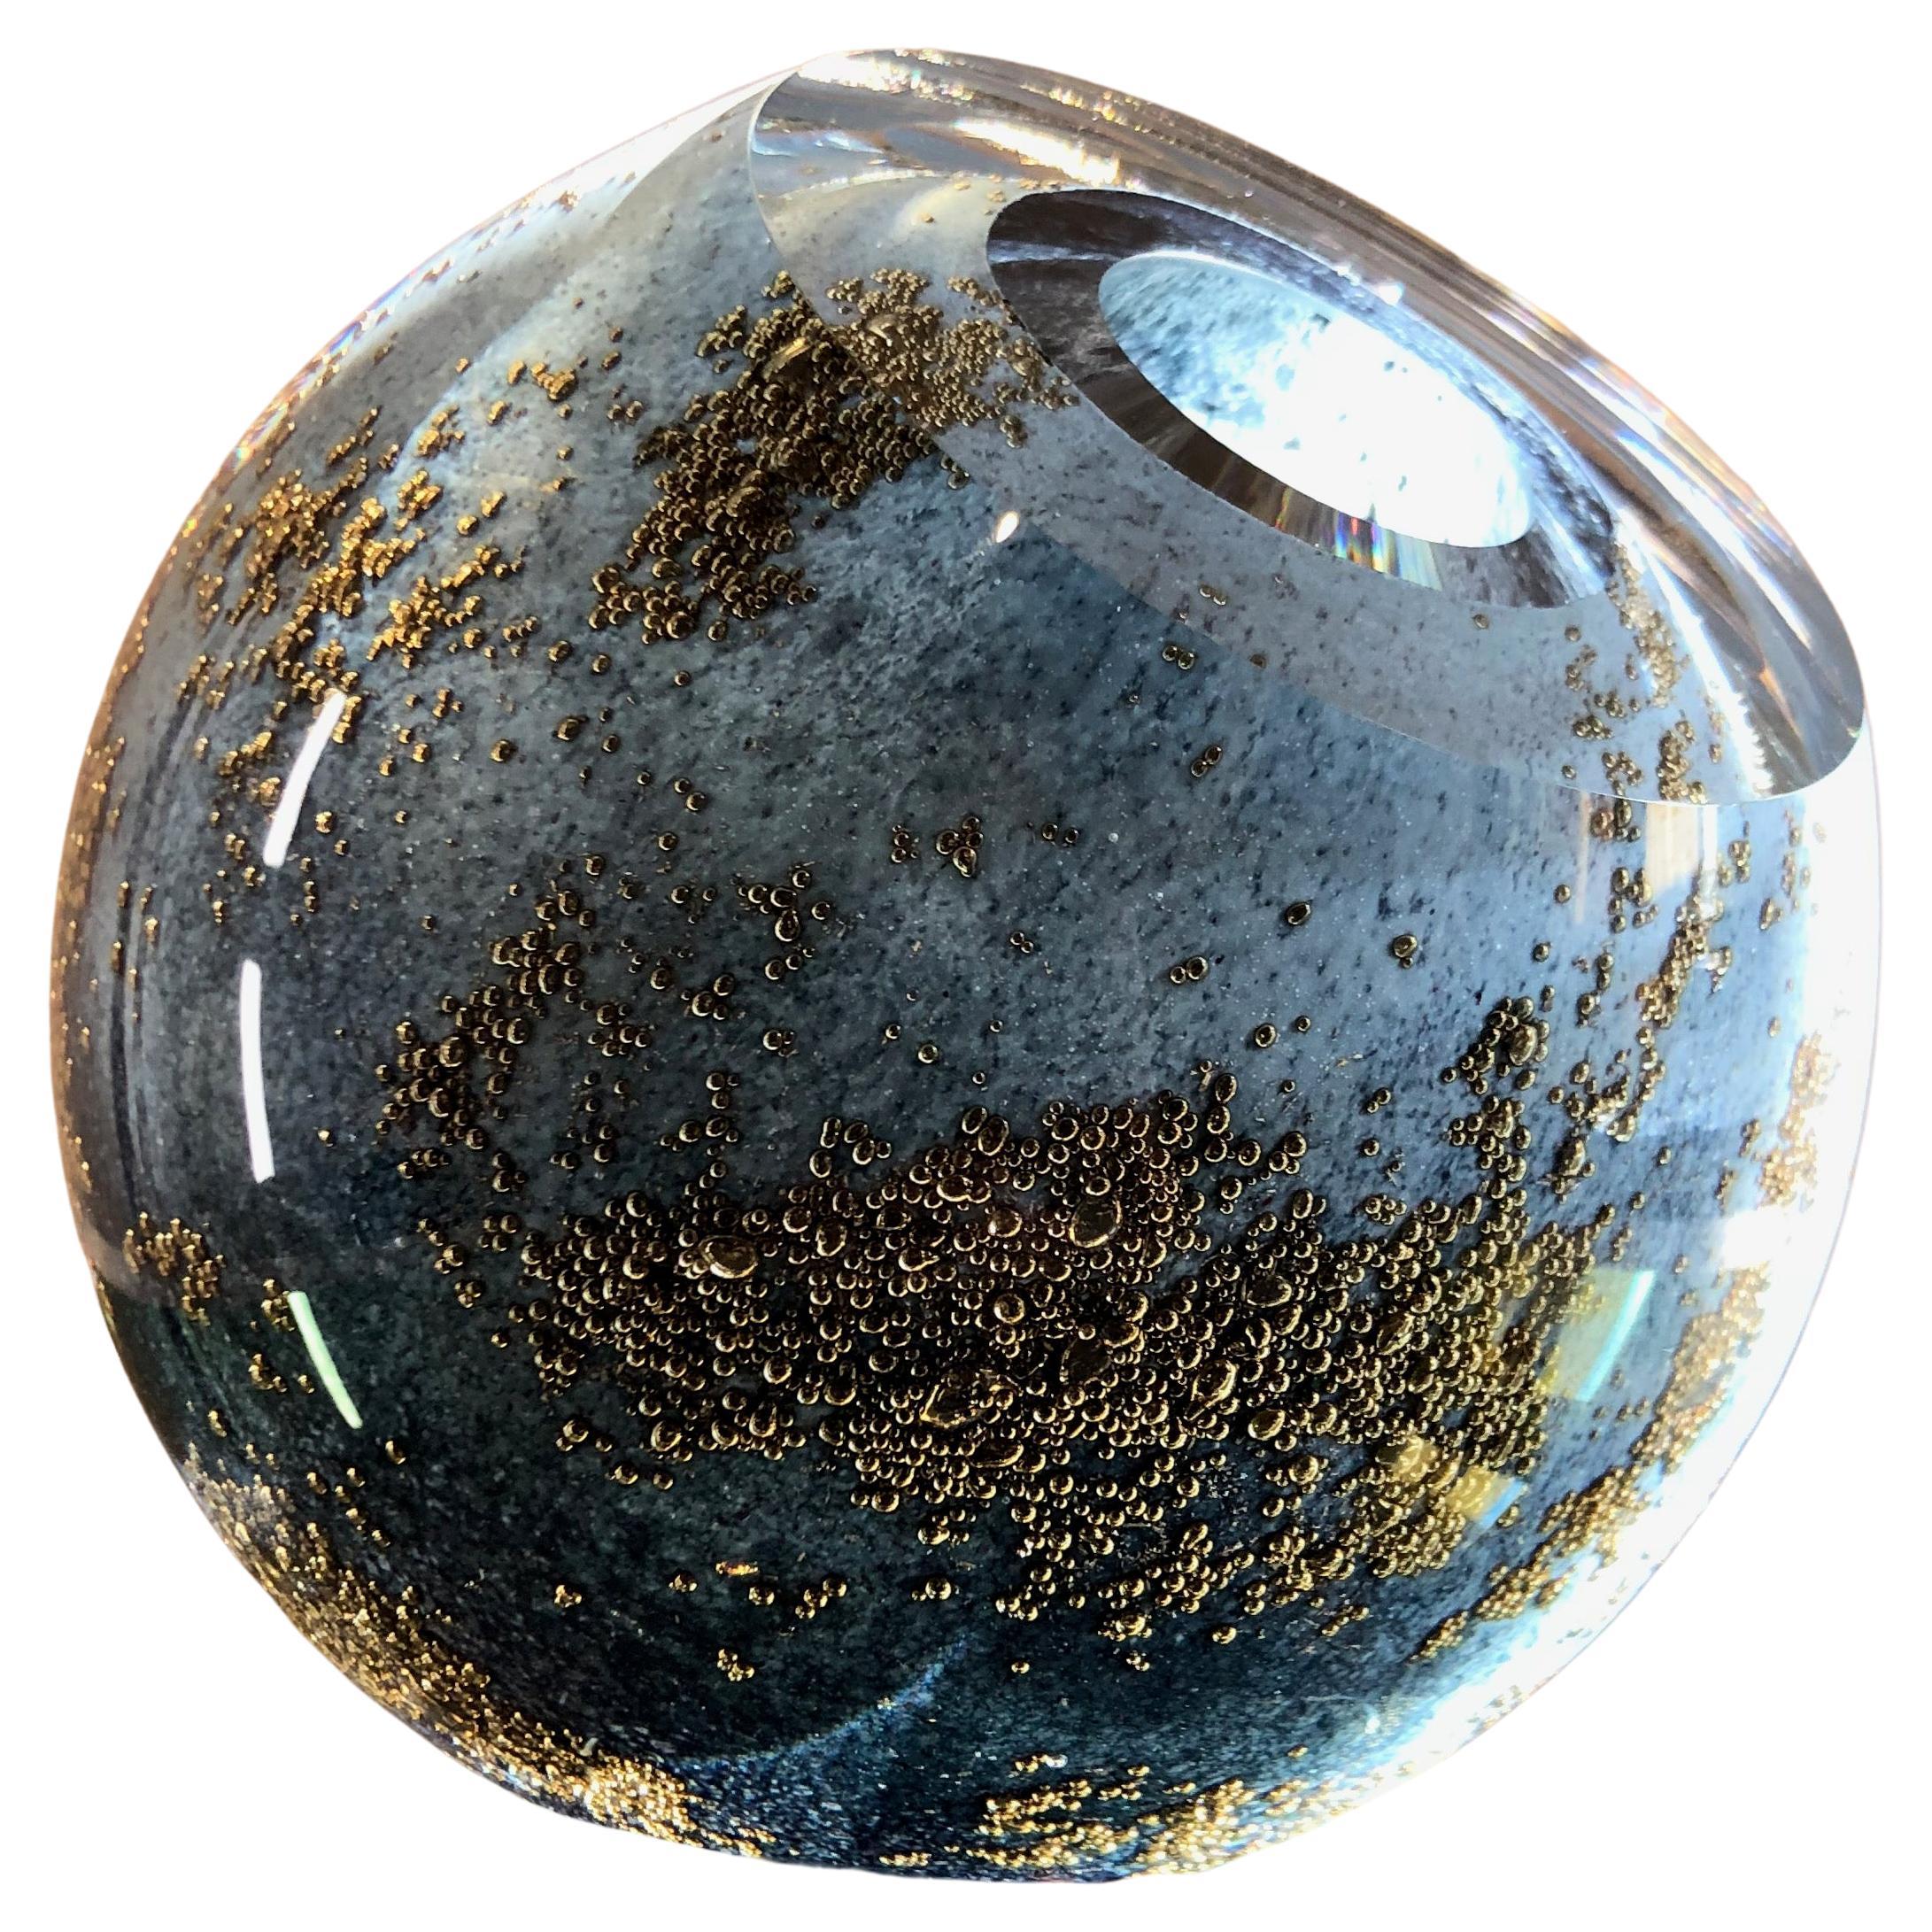 'Globe' Spherical Mouth-Blown Glass Vase in Blue and Golden Clusters